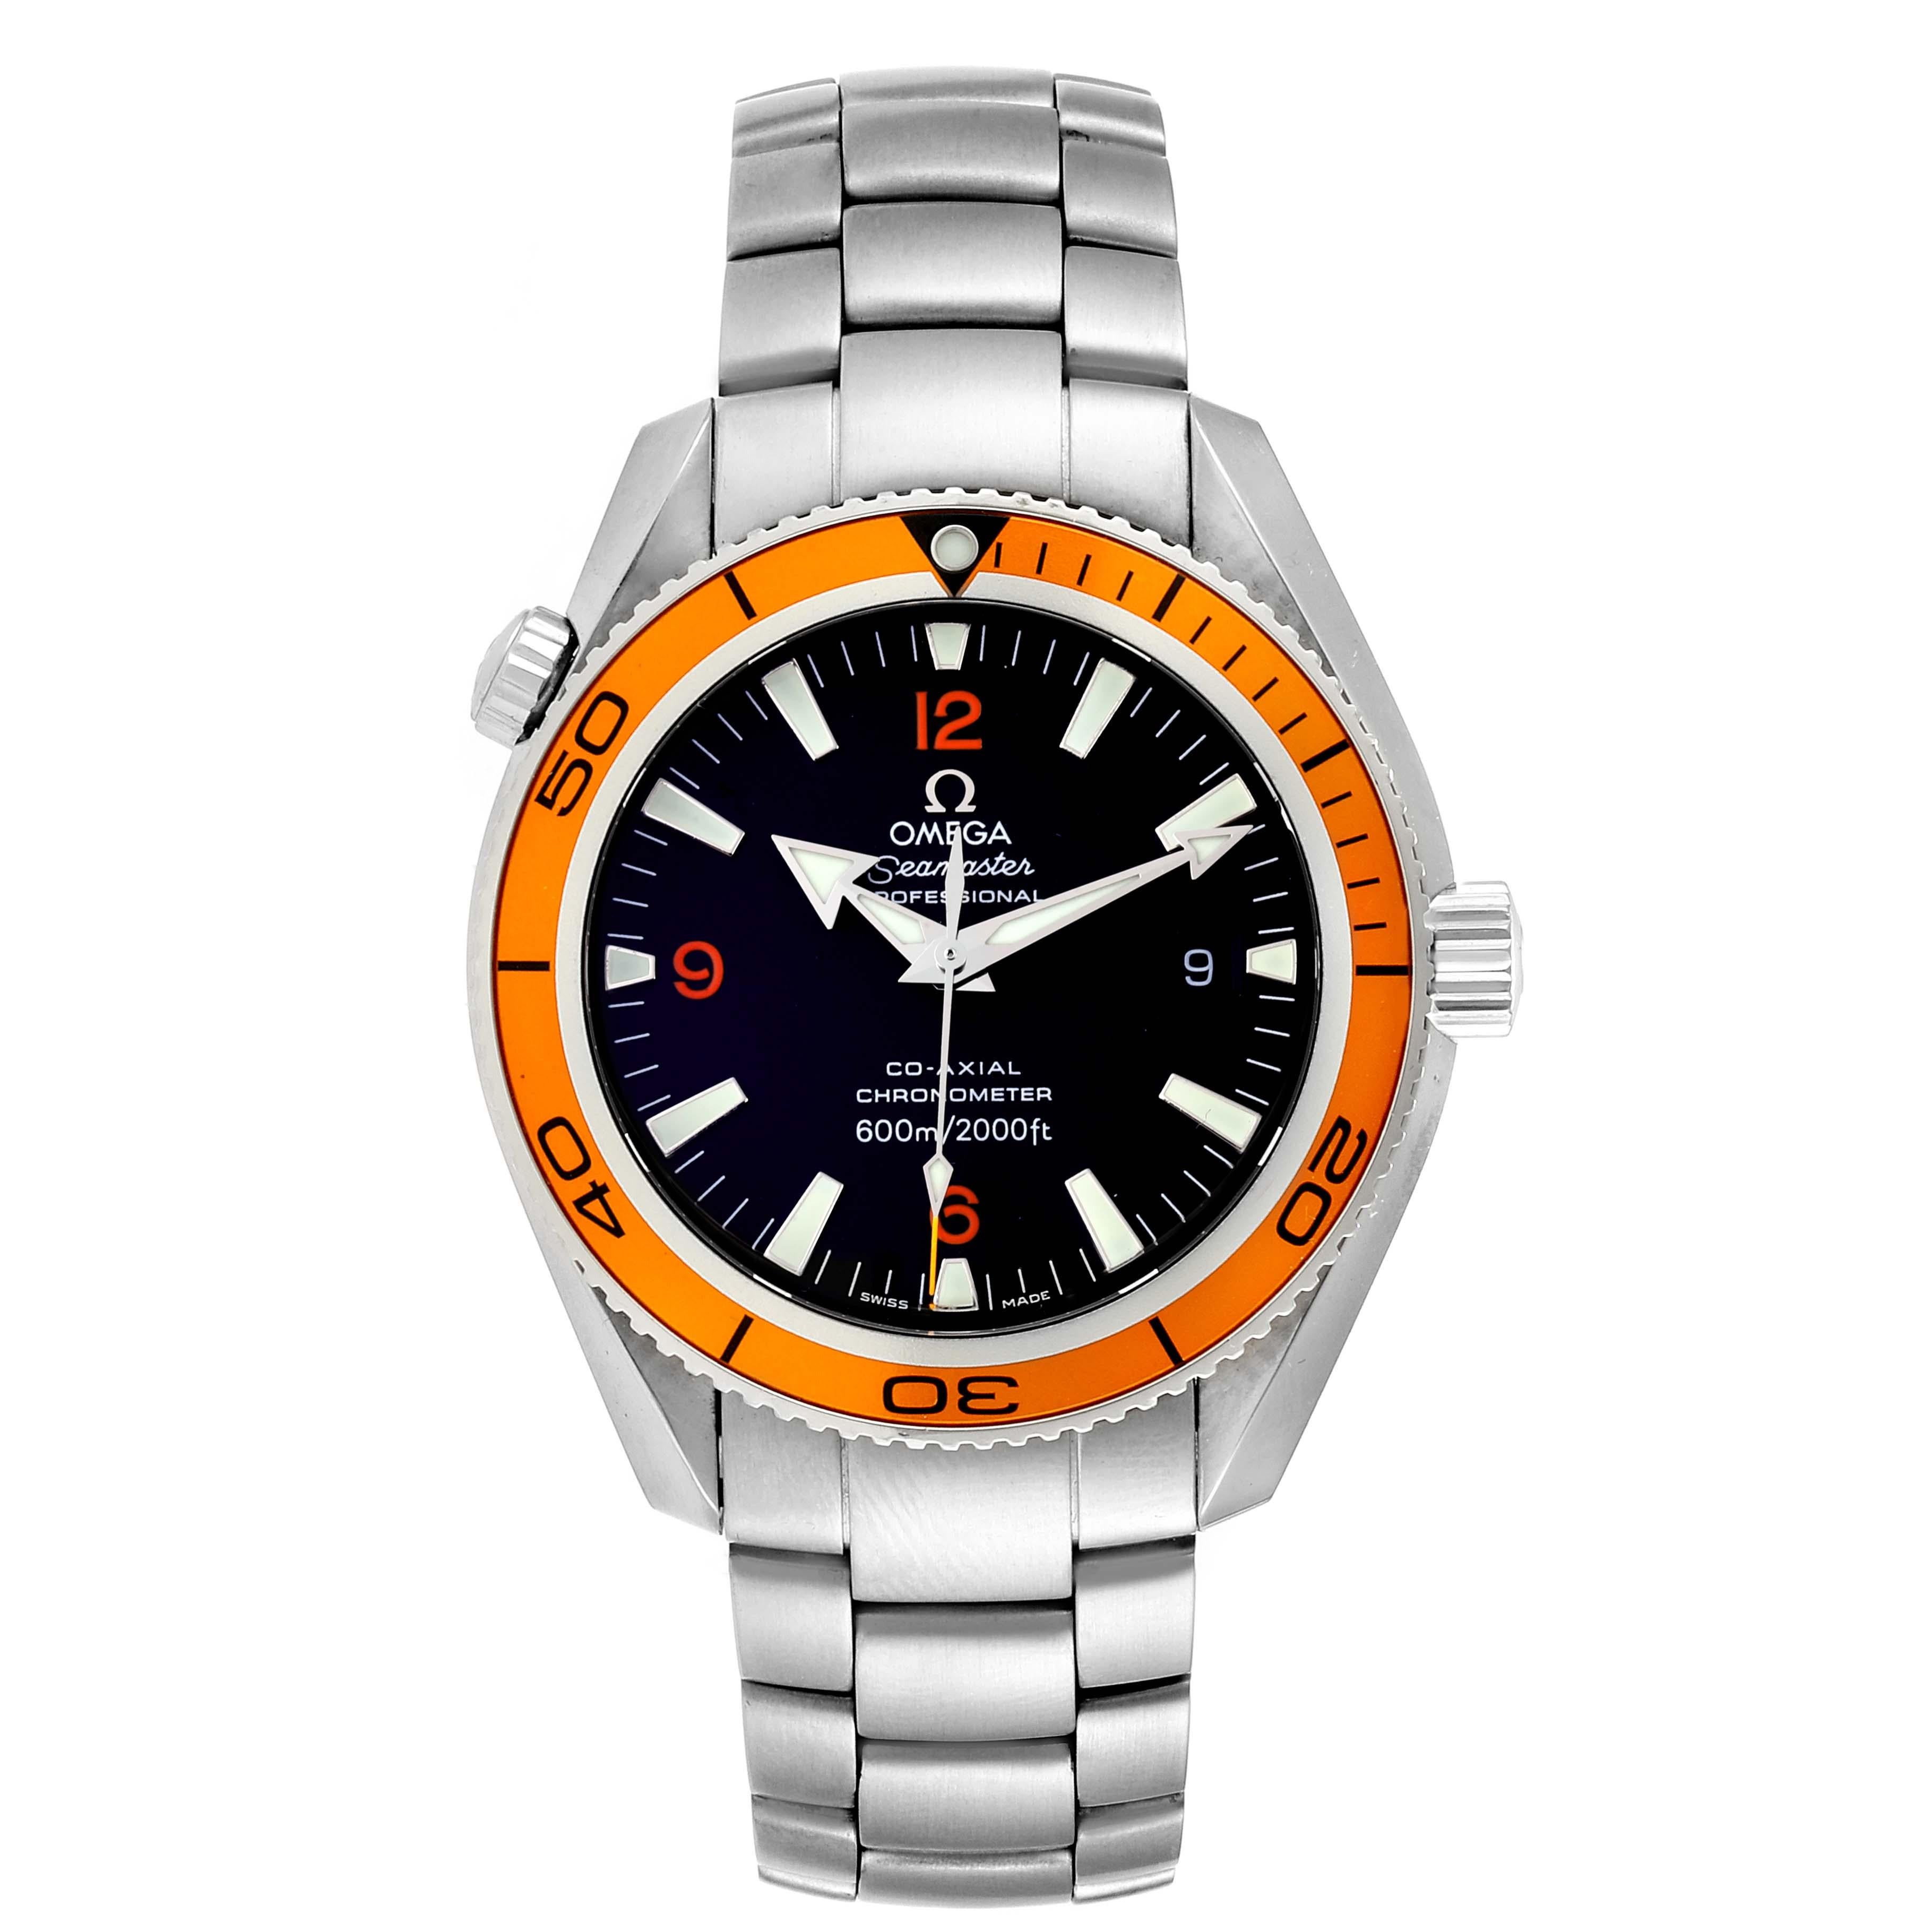 Omega Seamaster Planet Ocean Orange Bezel Watch 2209.50.00 Card. Automatic self-winding chronograph movement. Stainless steel round case 42.0 mm in diameter. Orange uni-directional rotating bezel. Scratch resistant sapphire crystal. Black dial with